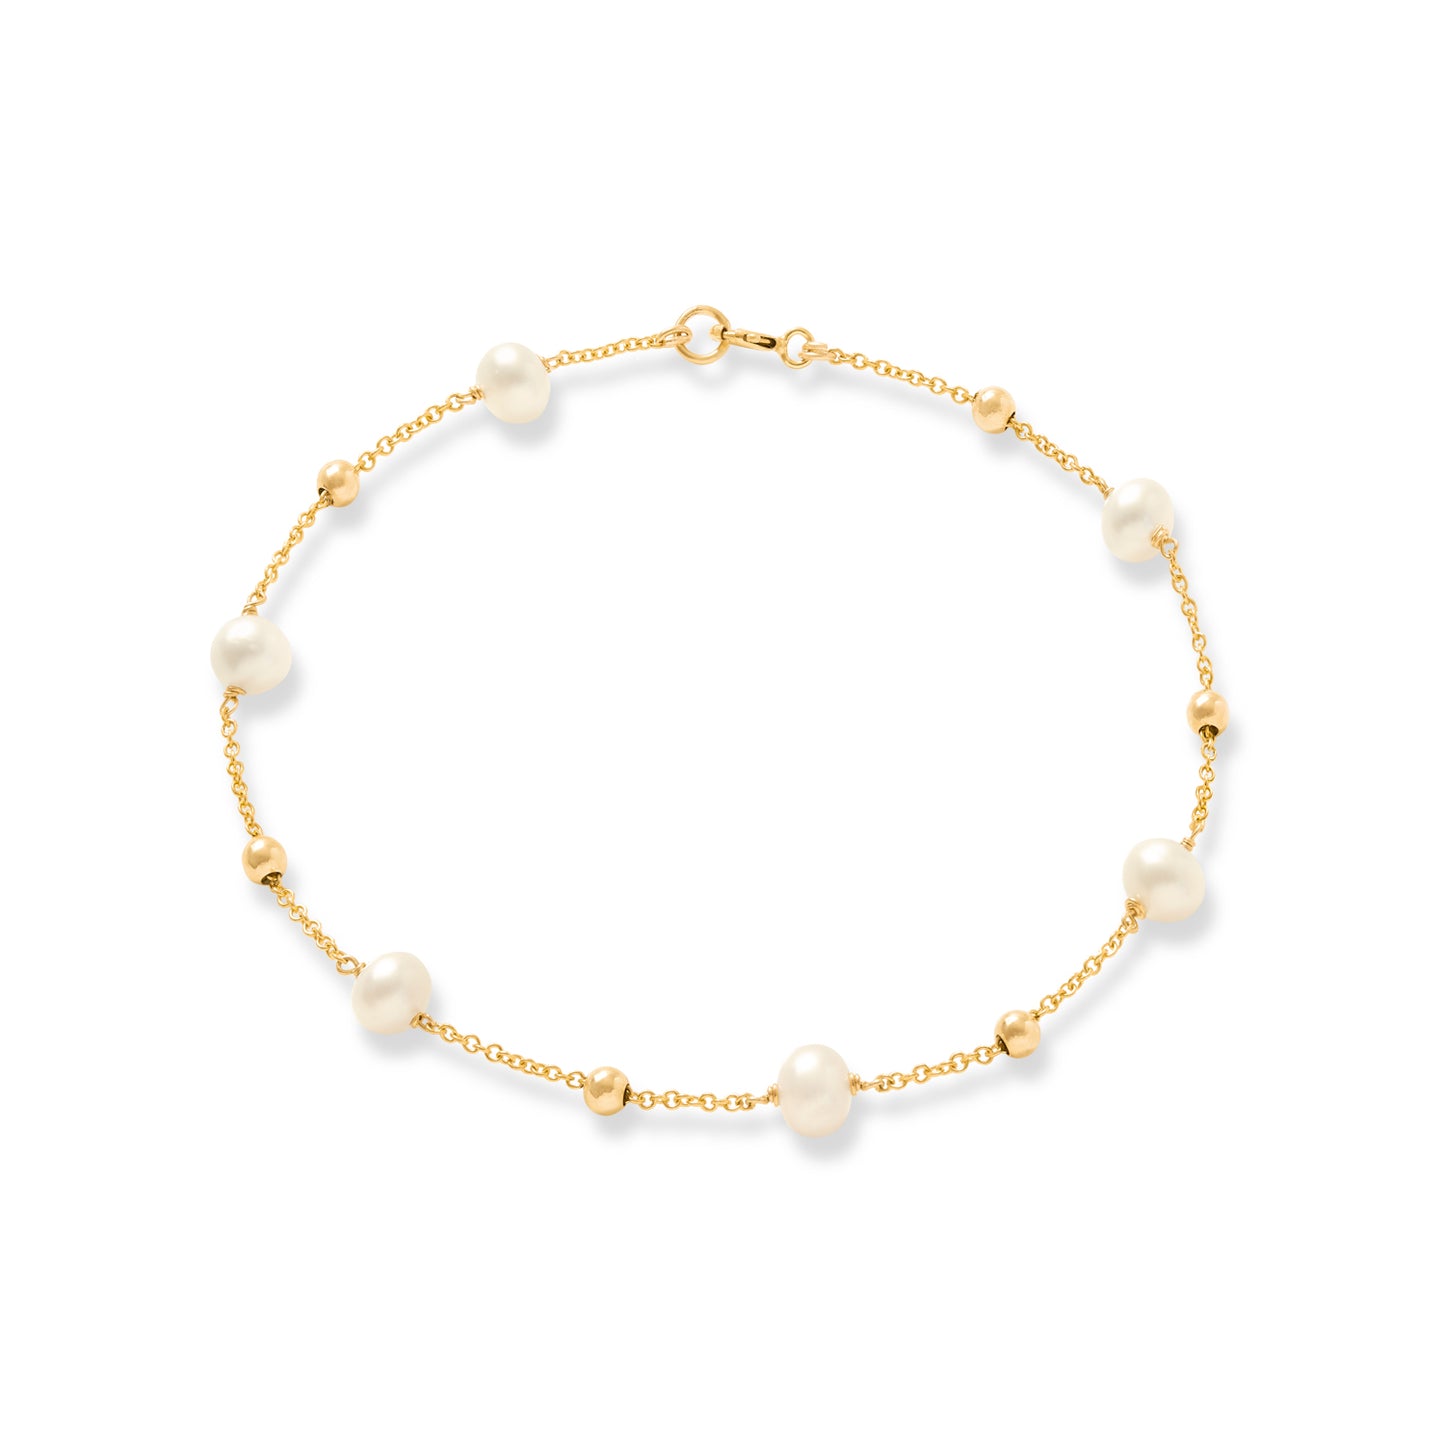 Credo fine chain bracelet with cultured freshwater pearls & gold beads